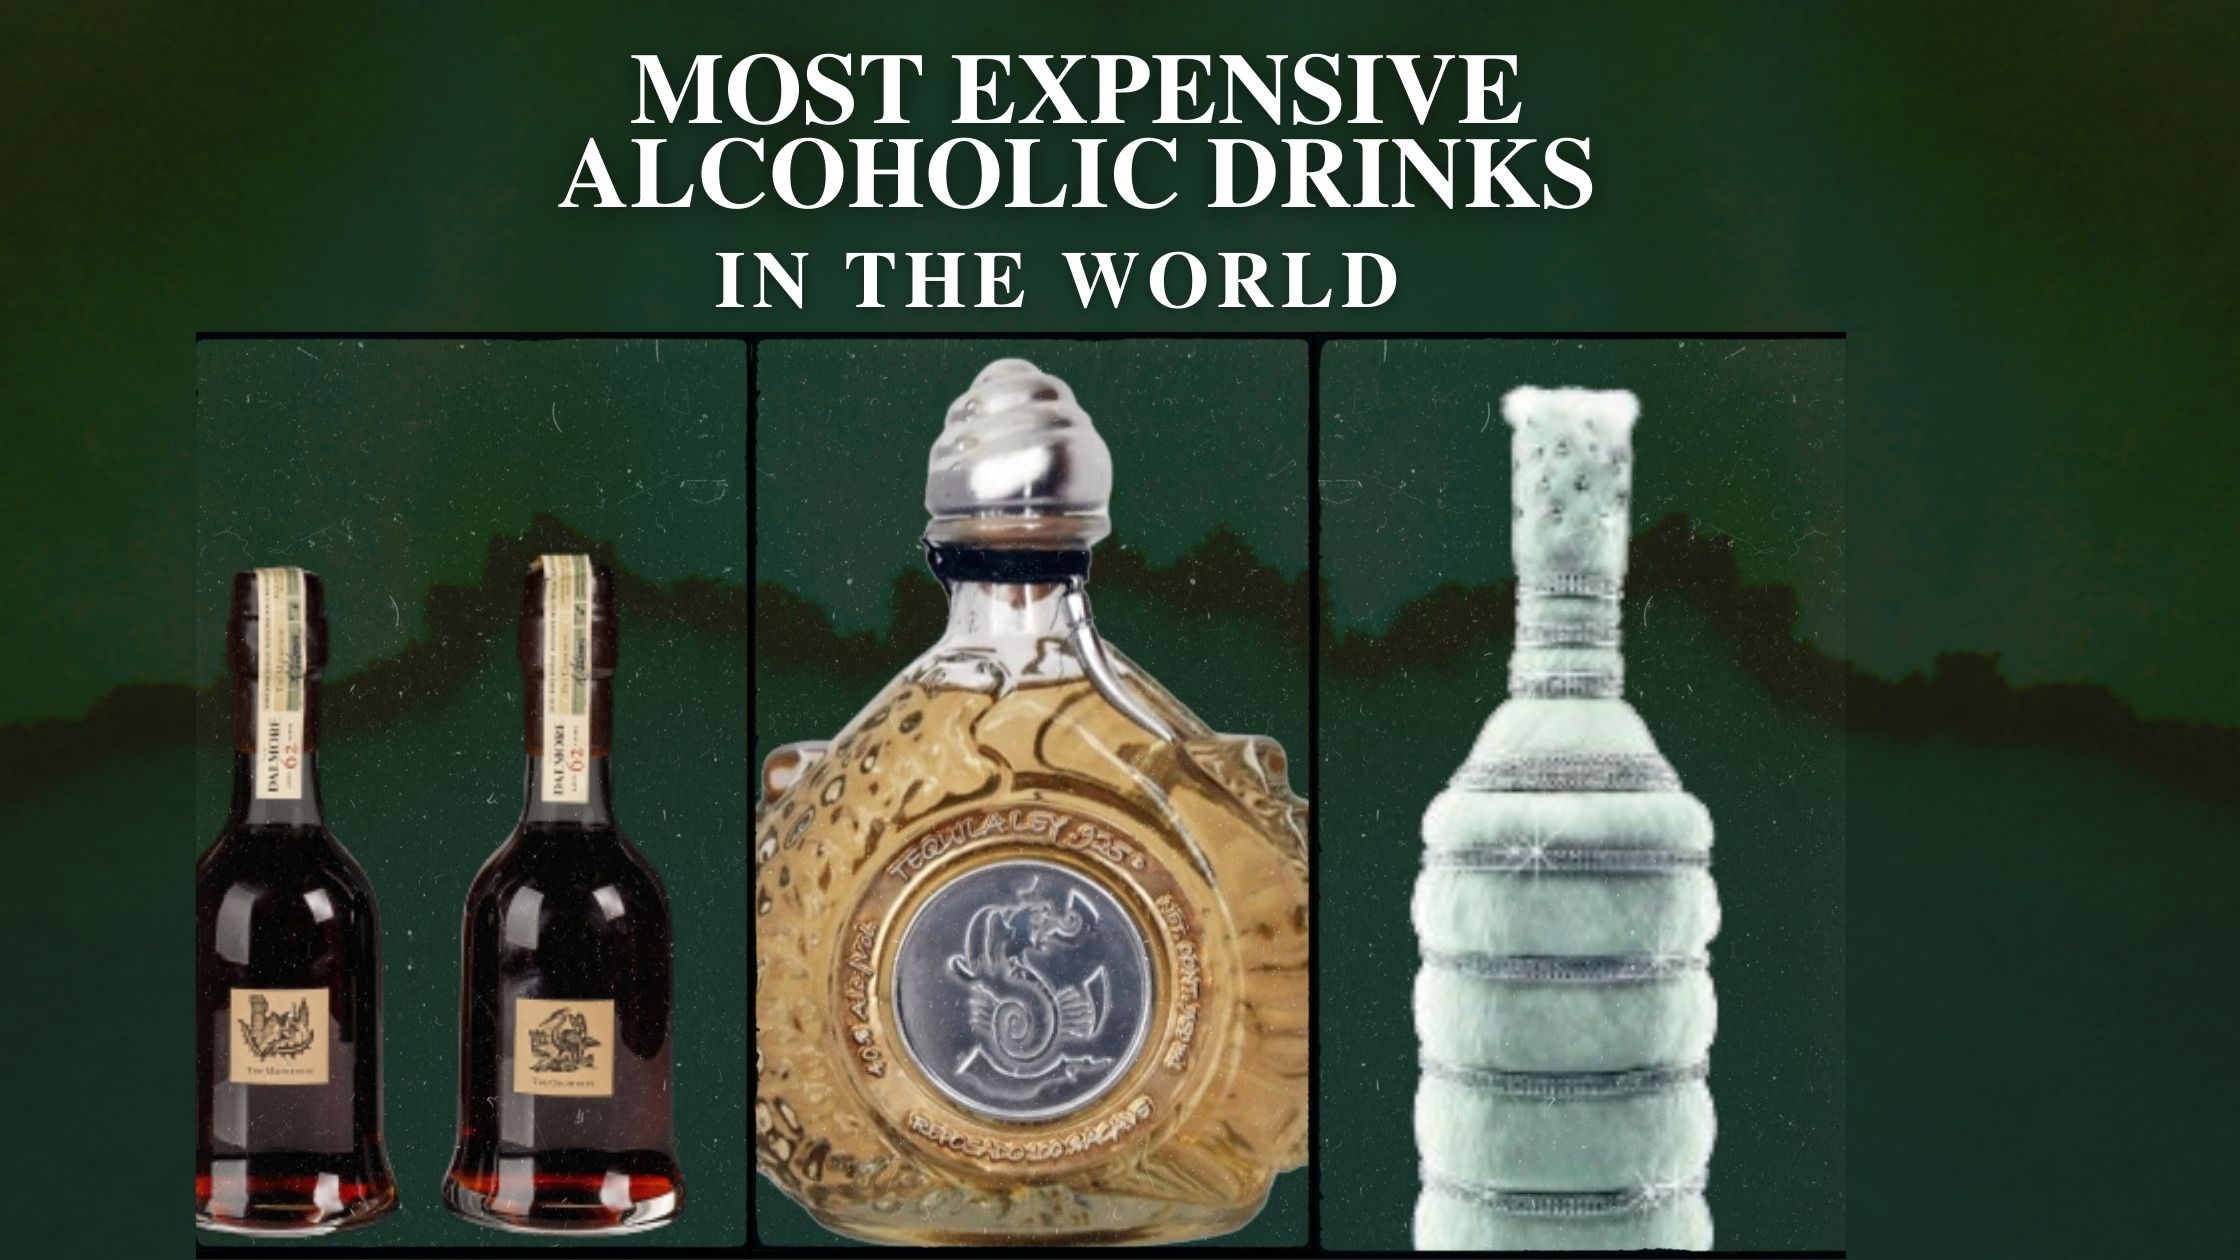 Top 10 Most Expensive Alcoholic Drinks In the World (2022)